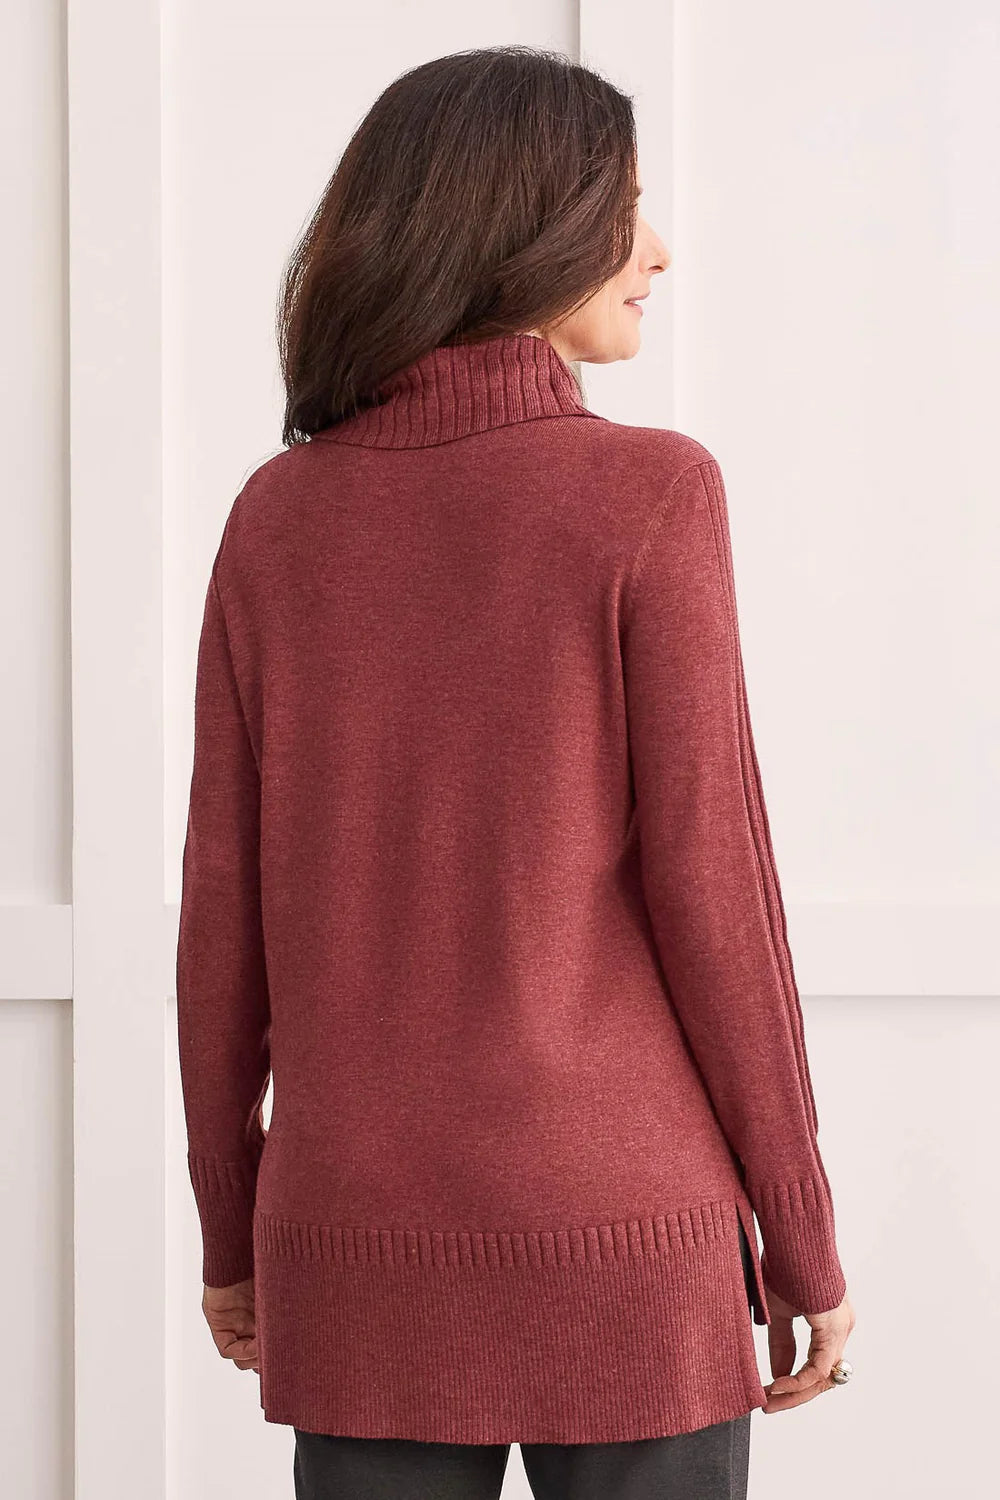 This sweater will instantly win you over with its chic cowl neckline and blended yarn fabric that cloaks you in comfort.